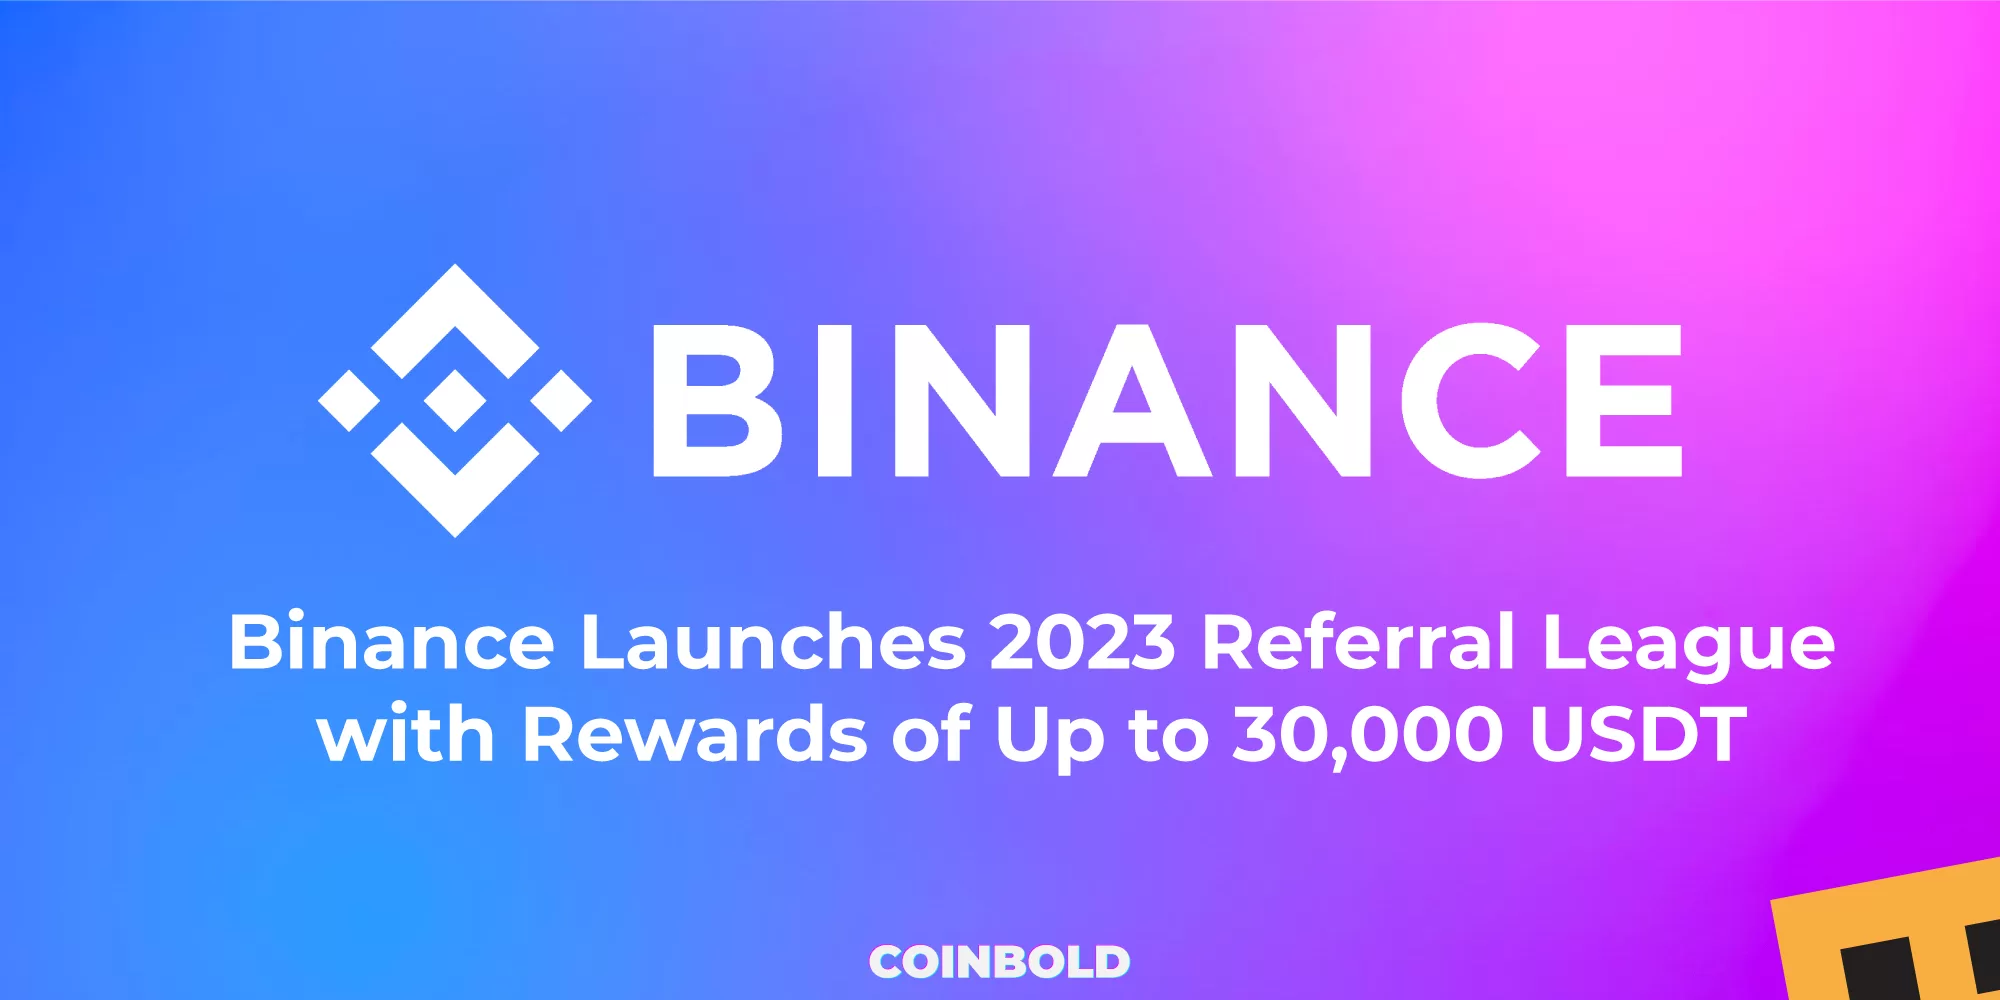 Binance Launches 2023 Referral League with Rewards of Up to 30,000 USDT